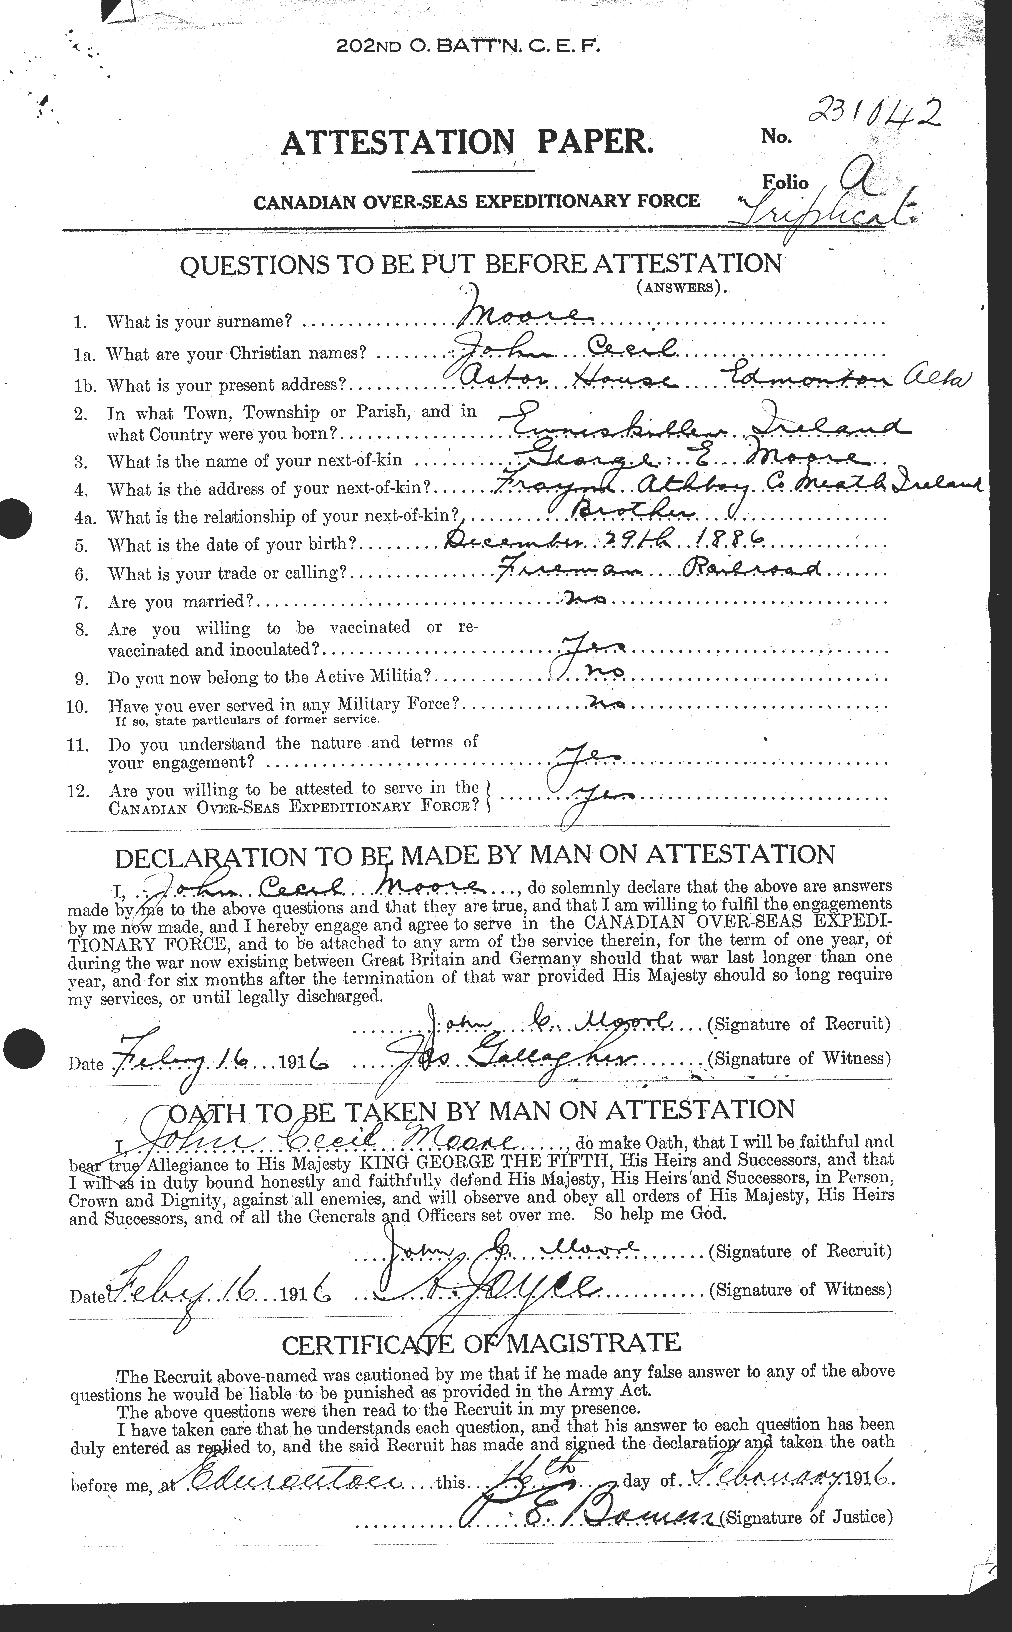 Personnel Records of the First World War - CEF 503269a